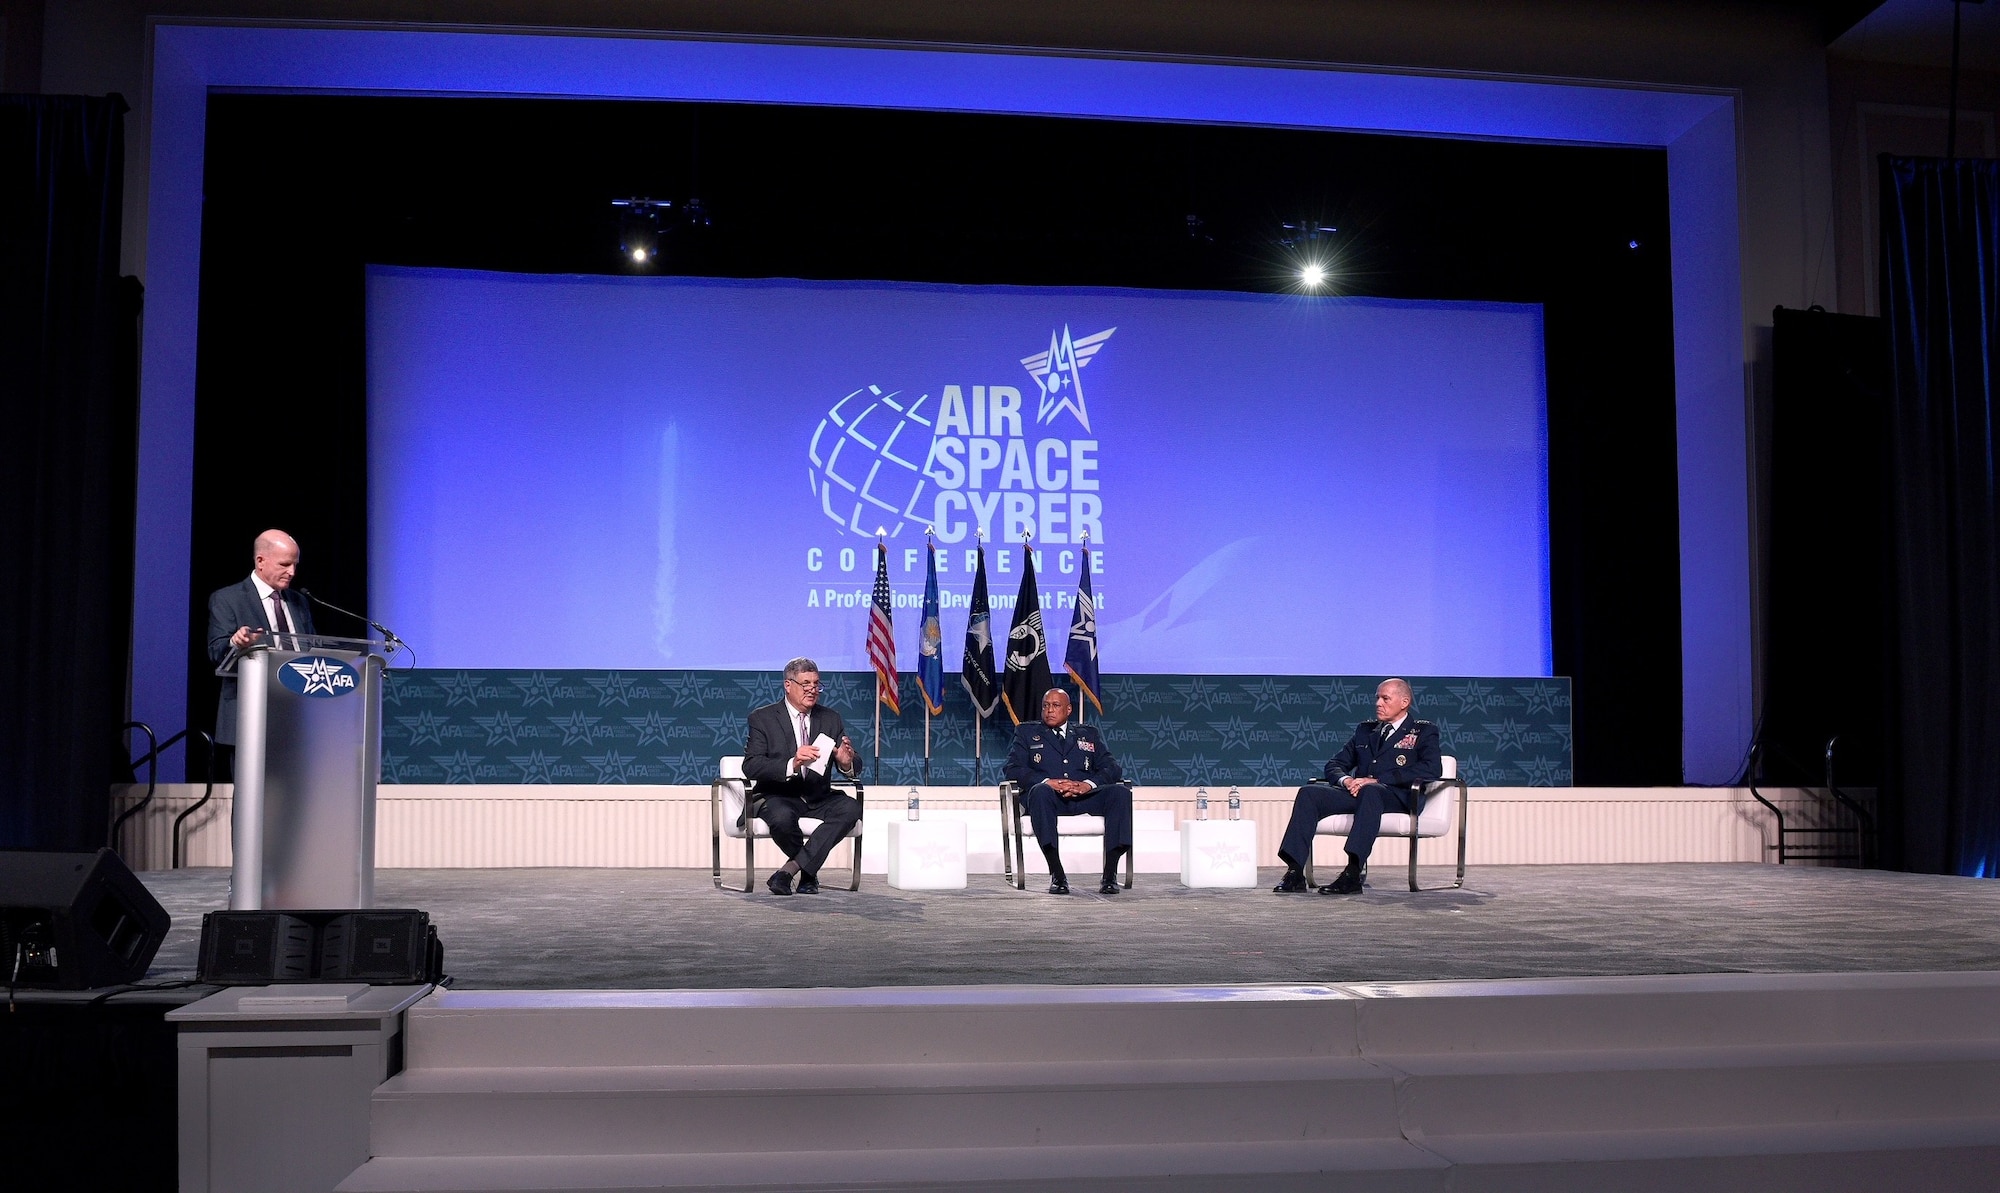 Three people sit in chairs next to a someone speaking at a podium. They are all on a stage during a conference.